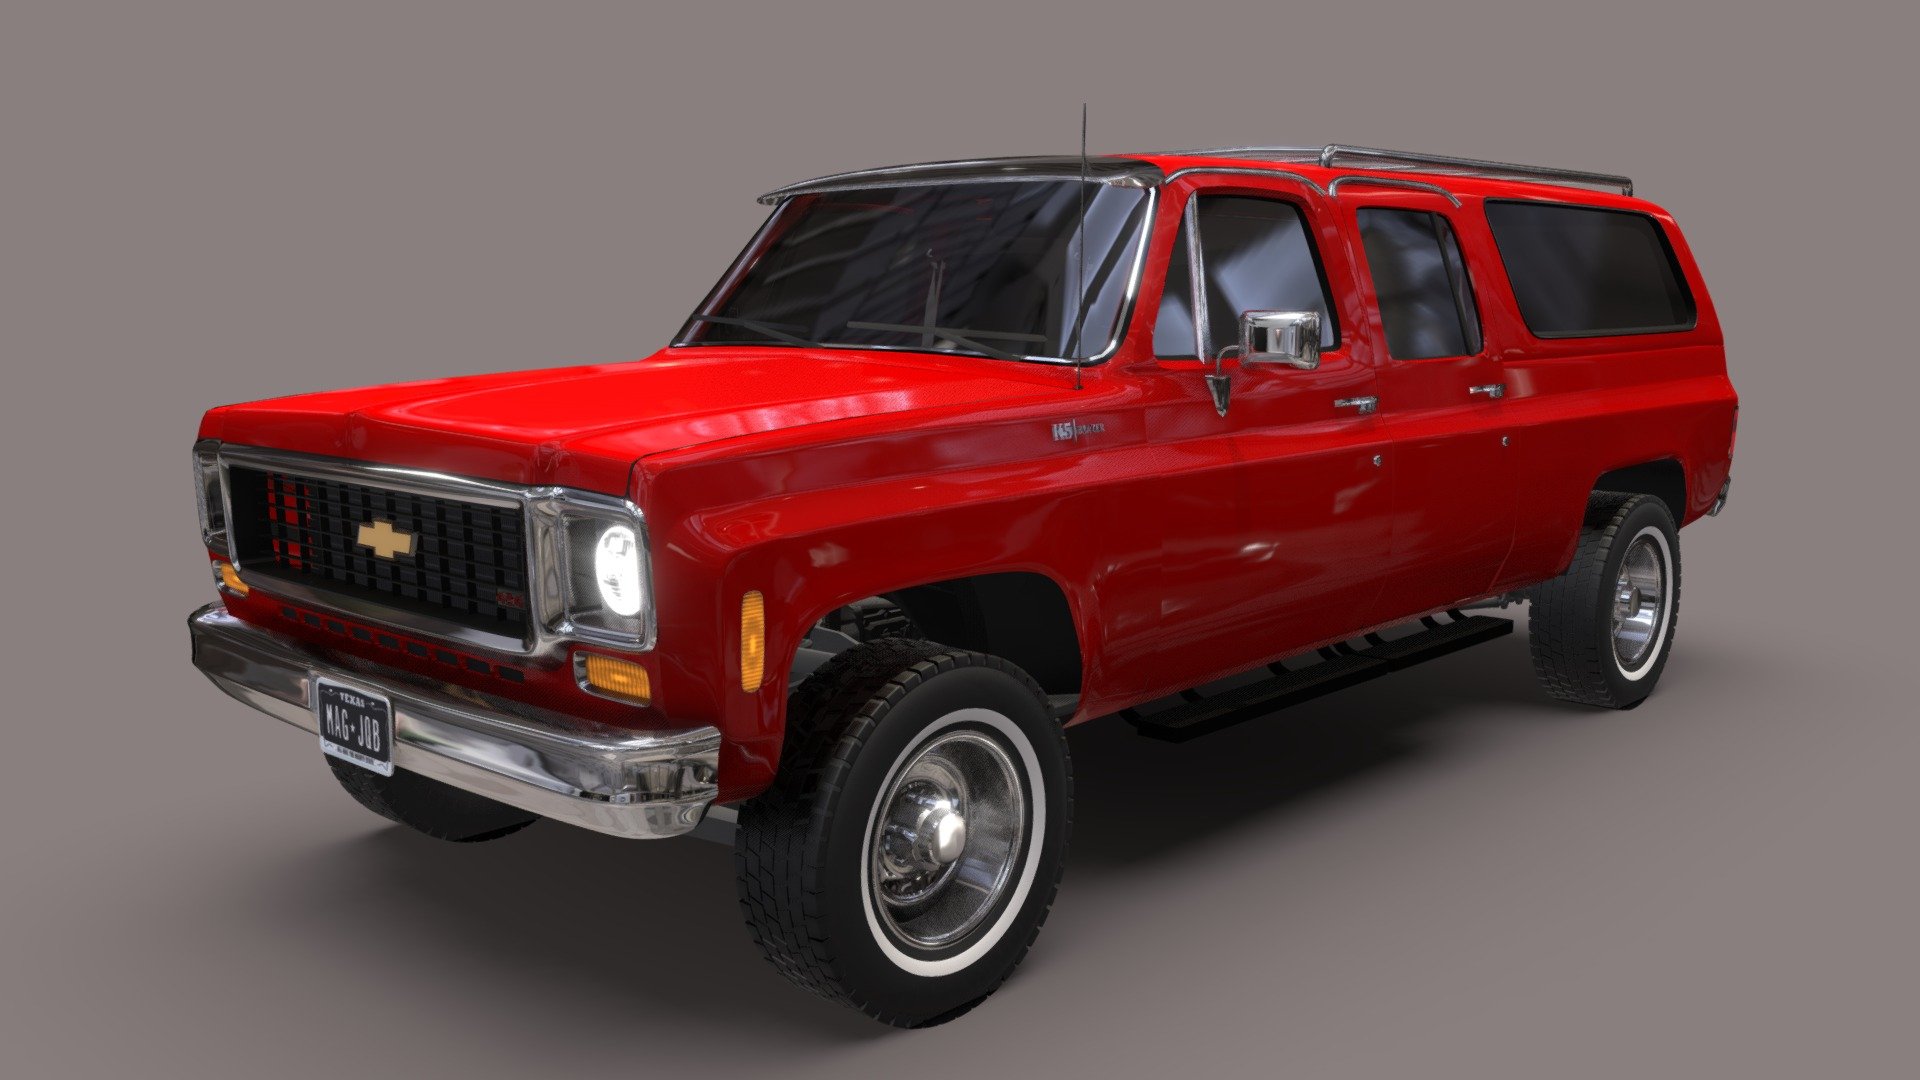 1979 Chevrolet Suburban. Made in Blender.
All pieces have been subdivided and smoothed 3d model